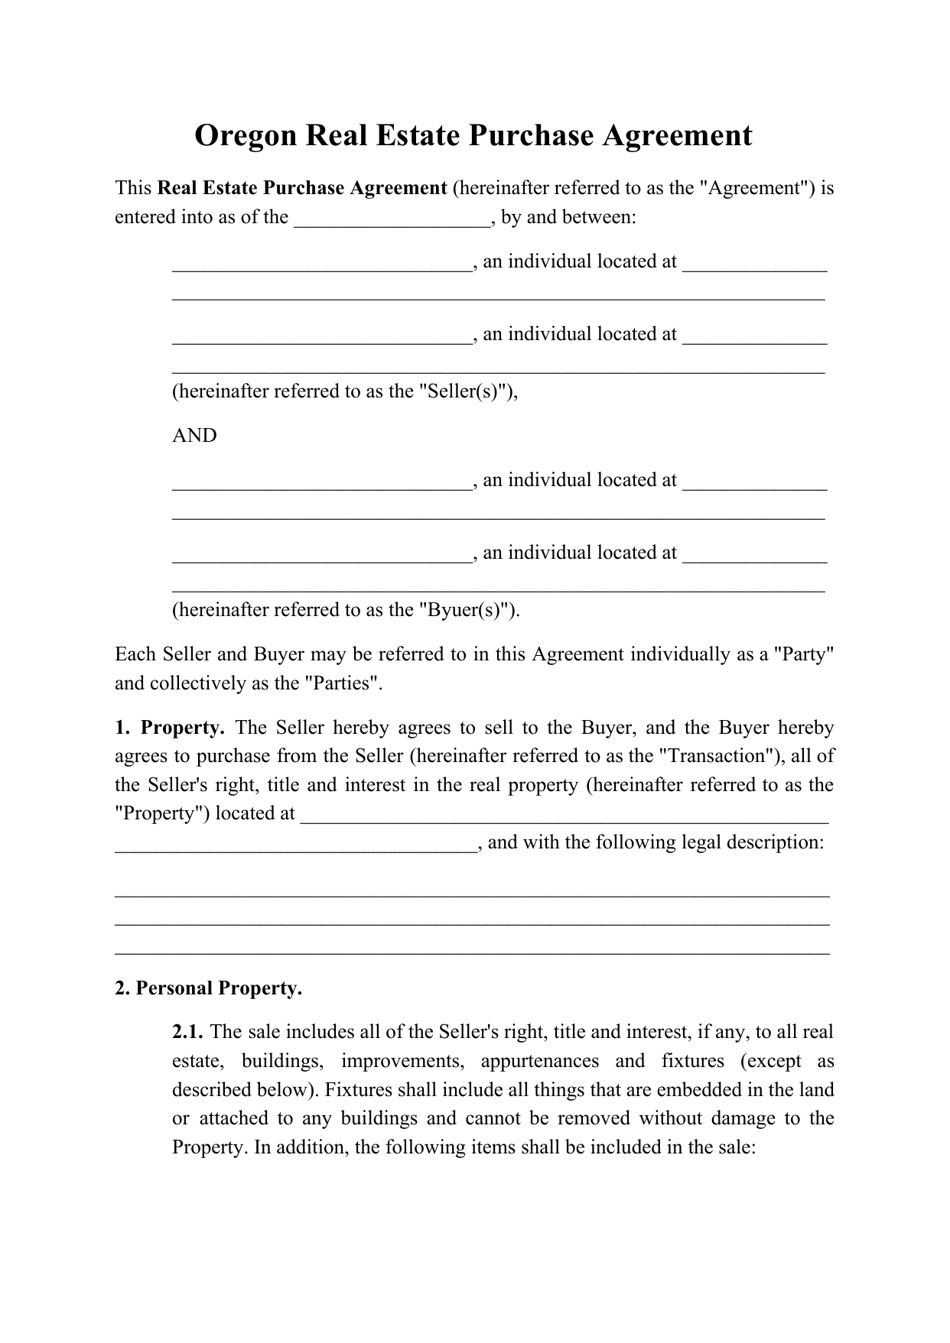 oregon-real-estate-purchase-agreement-template-download-printable-pdf